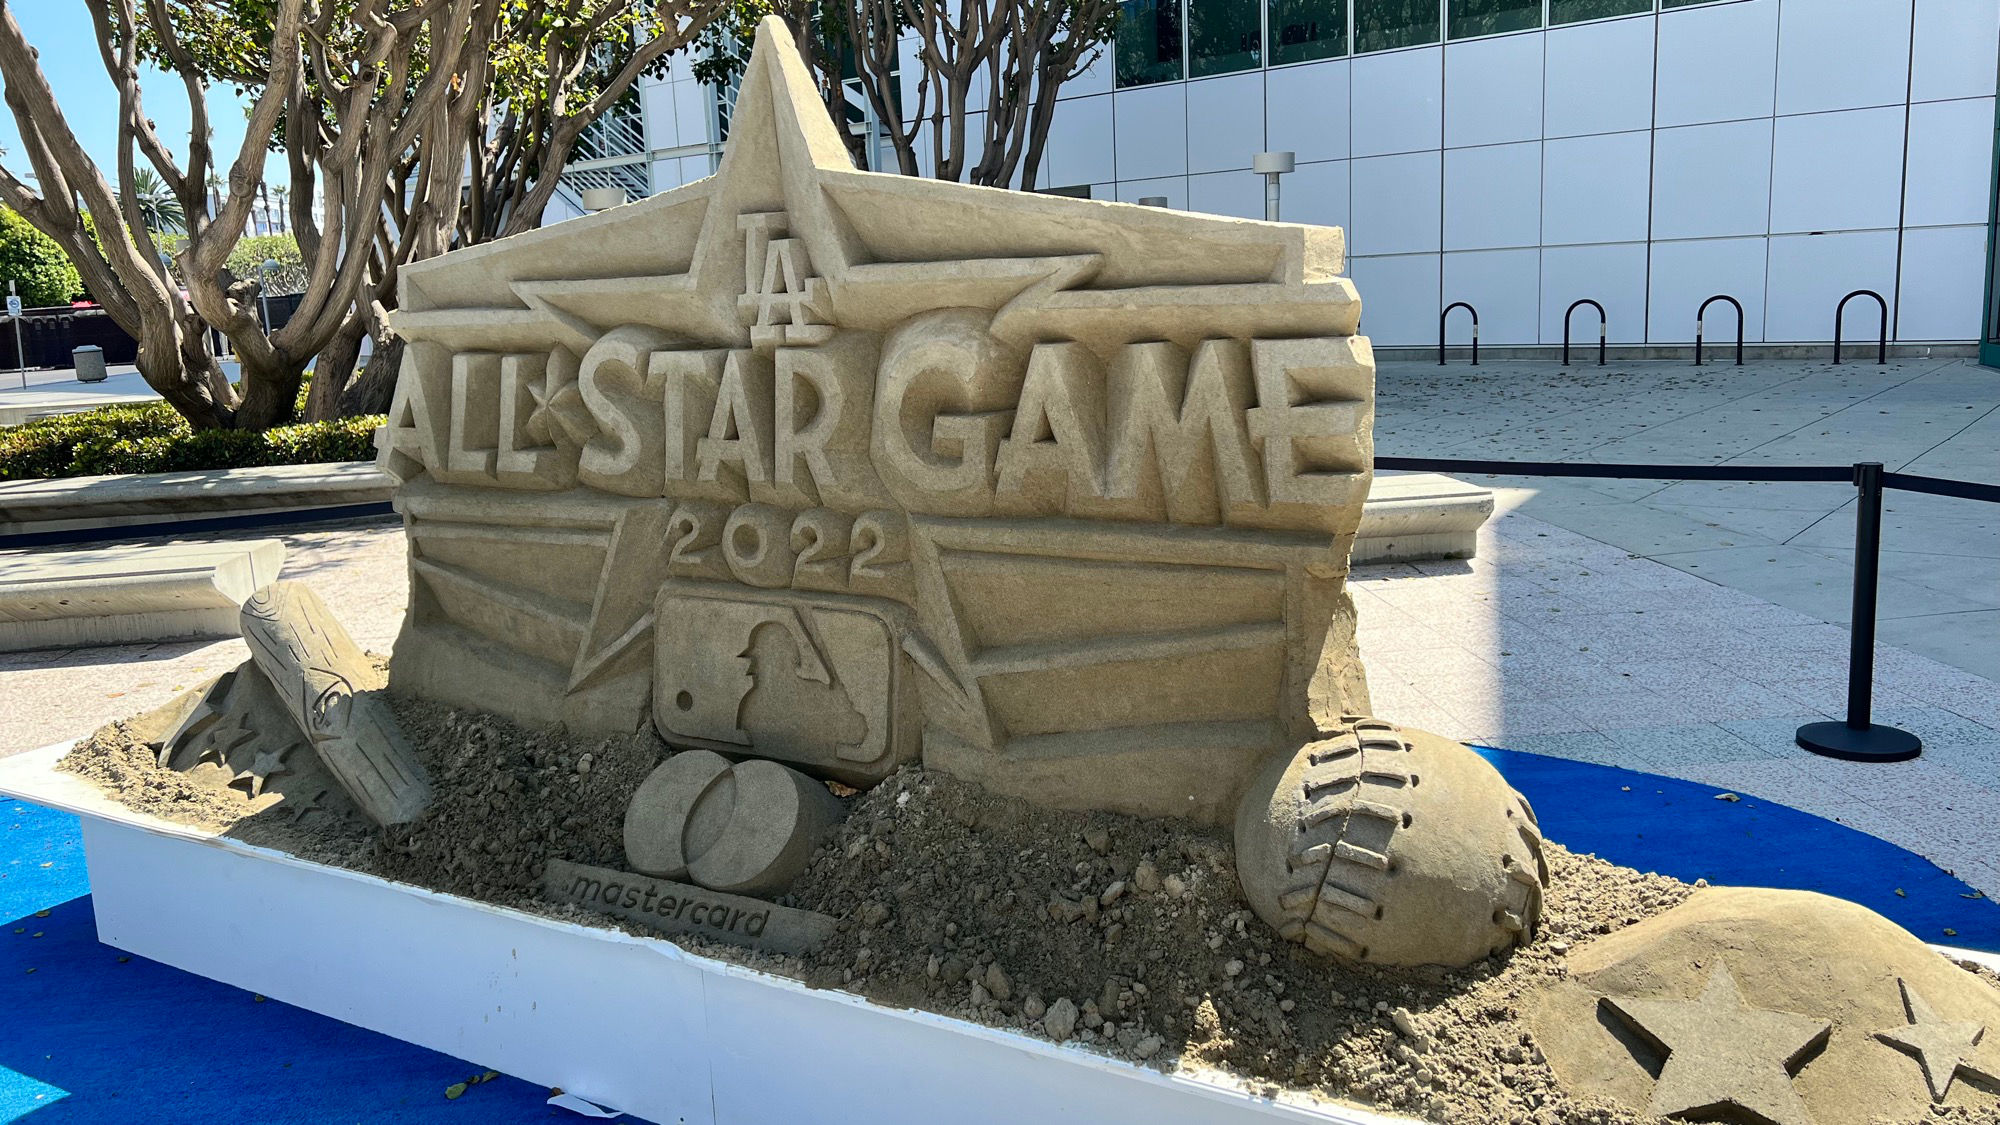 All Star Block Party Sand Castle